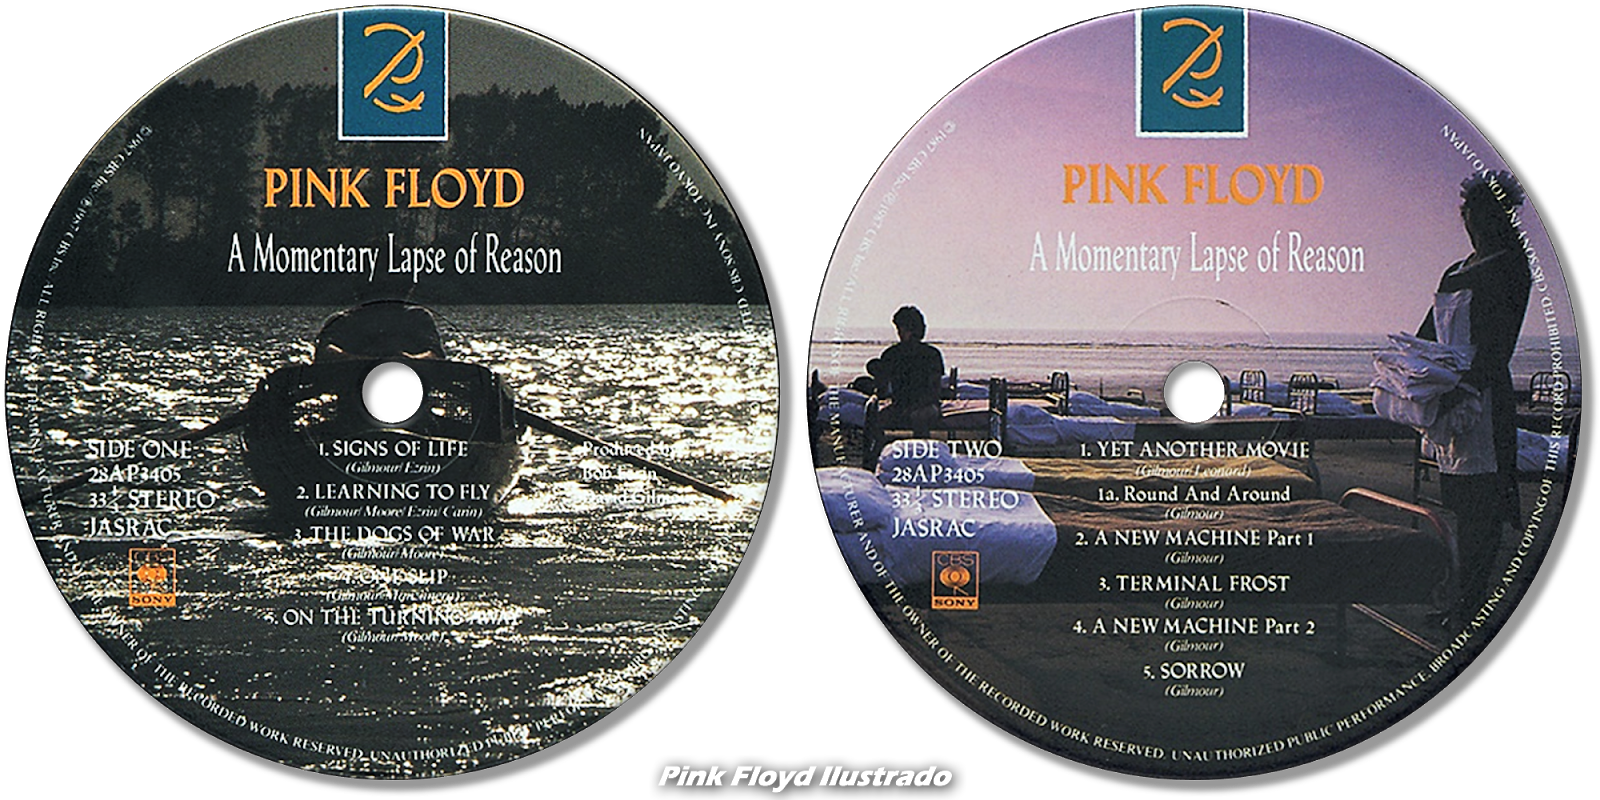 Momentary lapse of reasoning. Pink Floyd a Momentary lapse of reason CD. Pink Floyd a Momentary lapse of reason 1987. Pink Floyd 1987 a Momentary lapse of reason 2021. Pink Floyd a Momentary lapse of reason обложка.